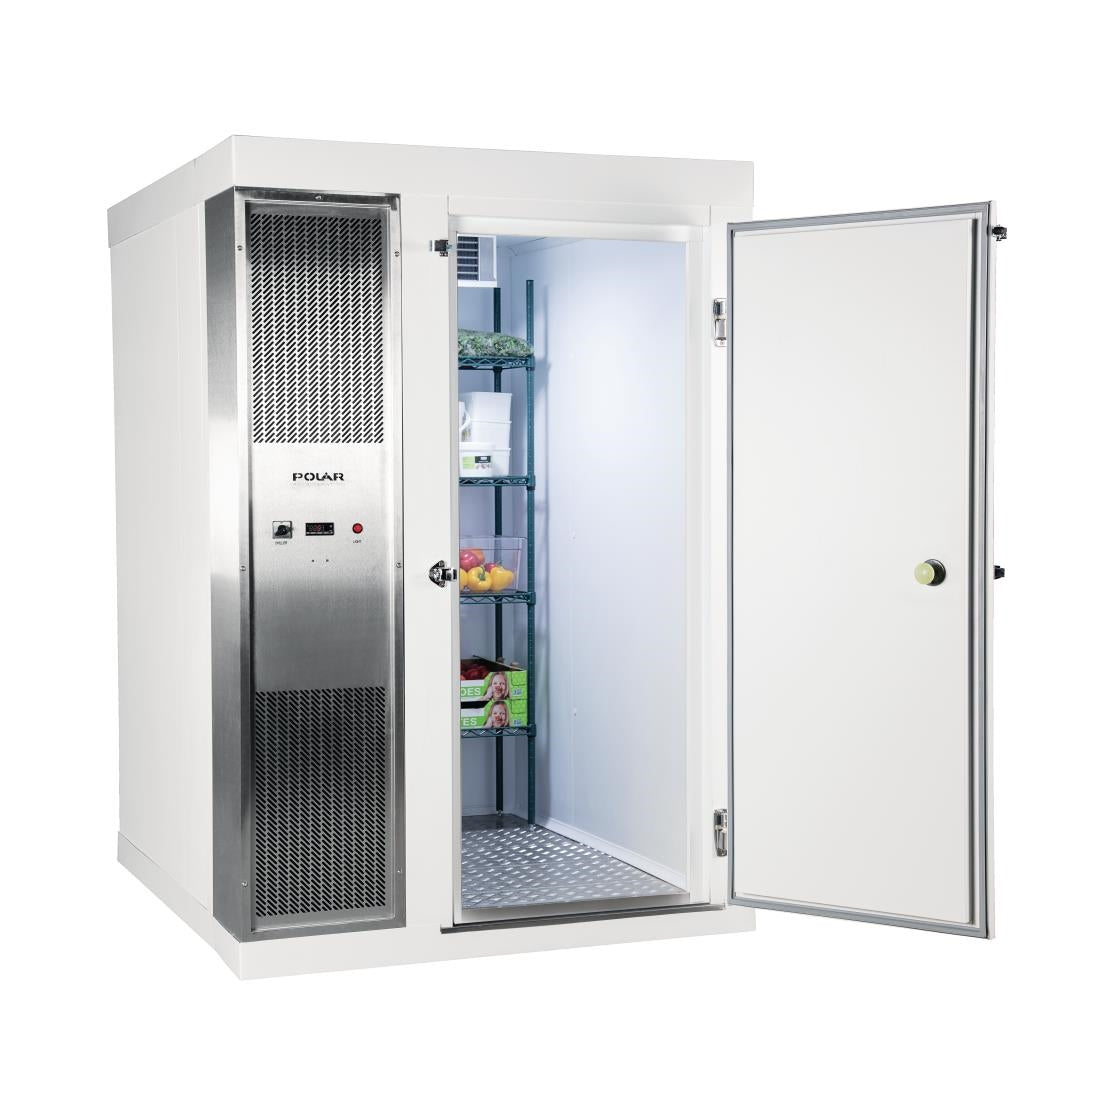 DS480-CWH Polar U-Series 1.2 x 1.5m Integral Walk In Cold Room White JD Catering Equipment Solutions Ltd